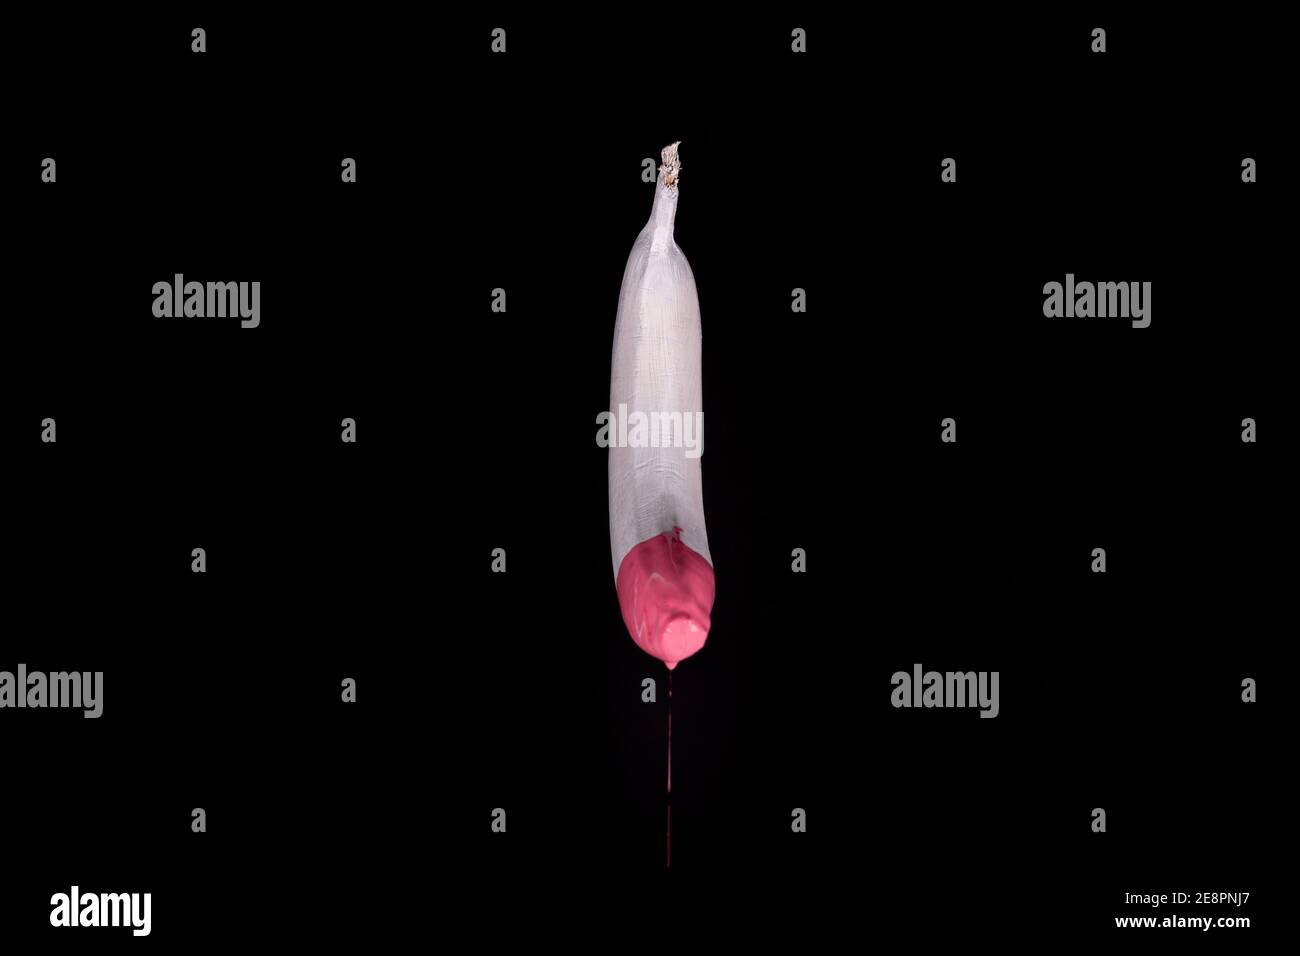 White floating banana with pink dripping paint. Black background. Creative food concept Stock Photo